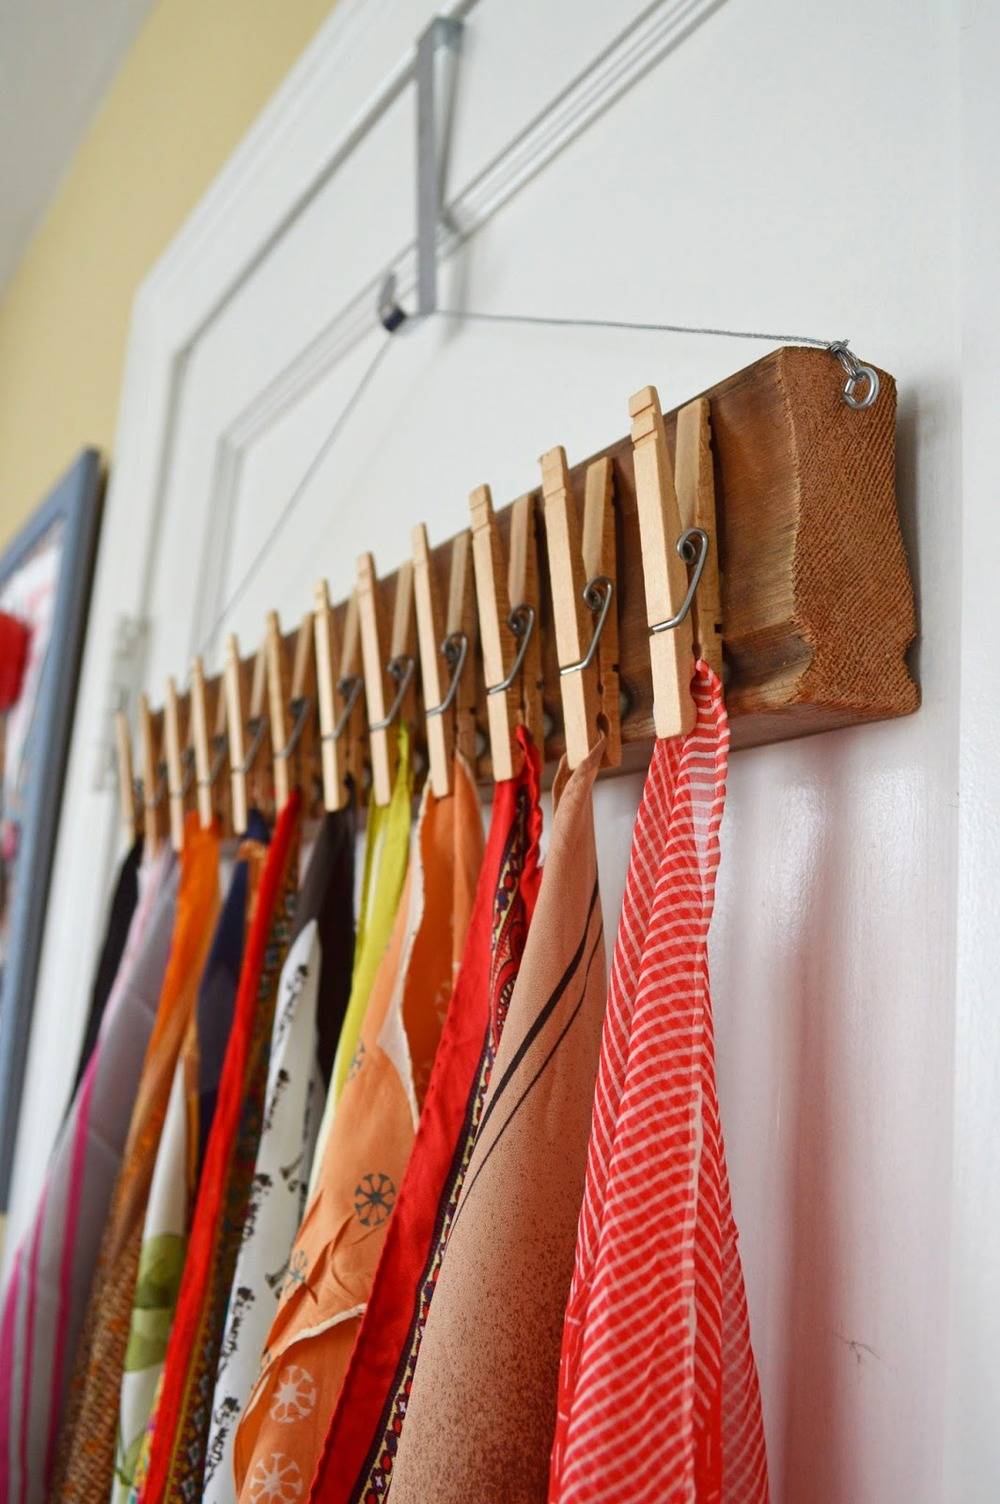 Cloths are hanging in an order to a hanger.